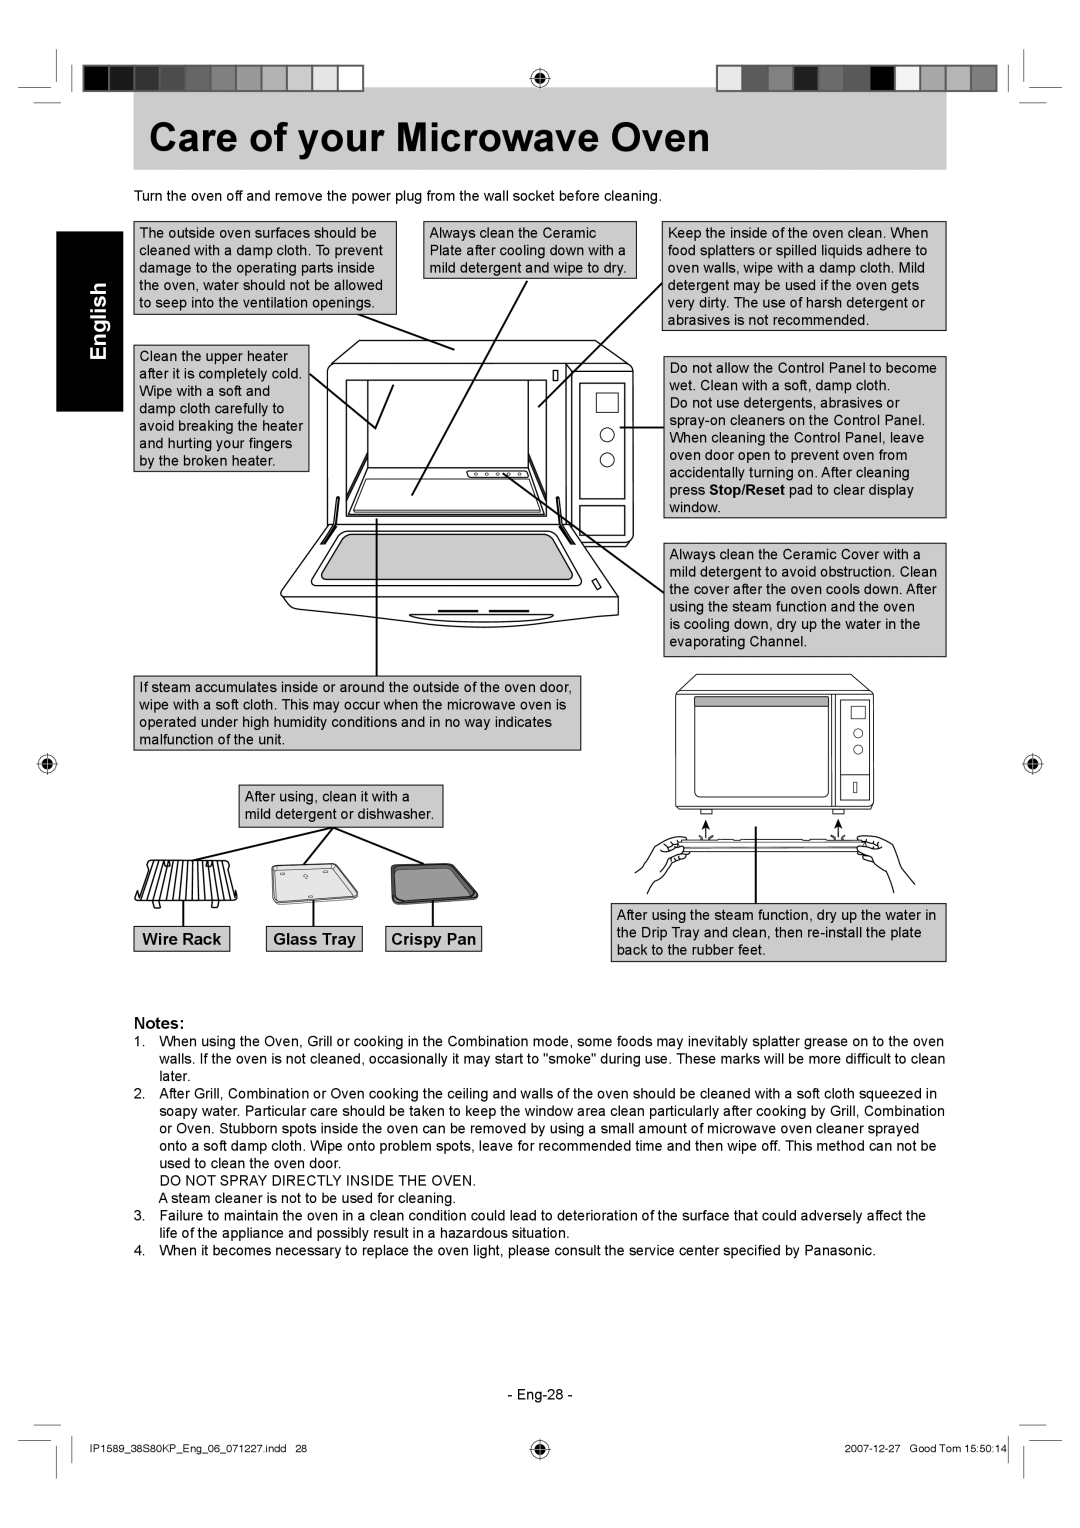 Panasonic NN-GS597M operating instructions Care of your Microwave Oven, Wire Rack Notes, English, Glass Tray, Crispy Pan 